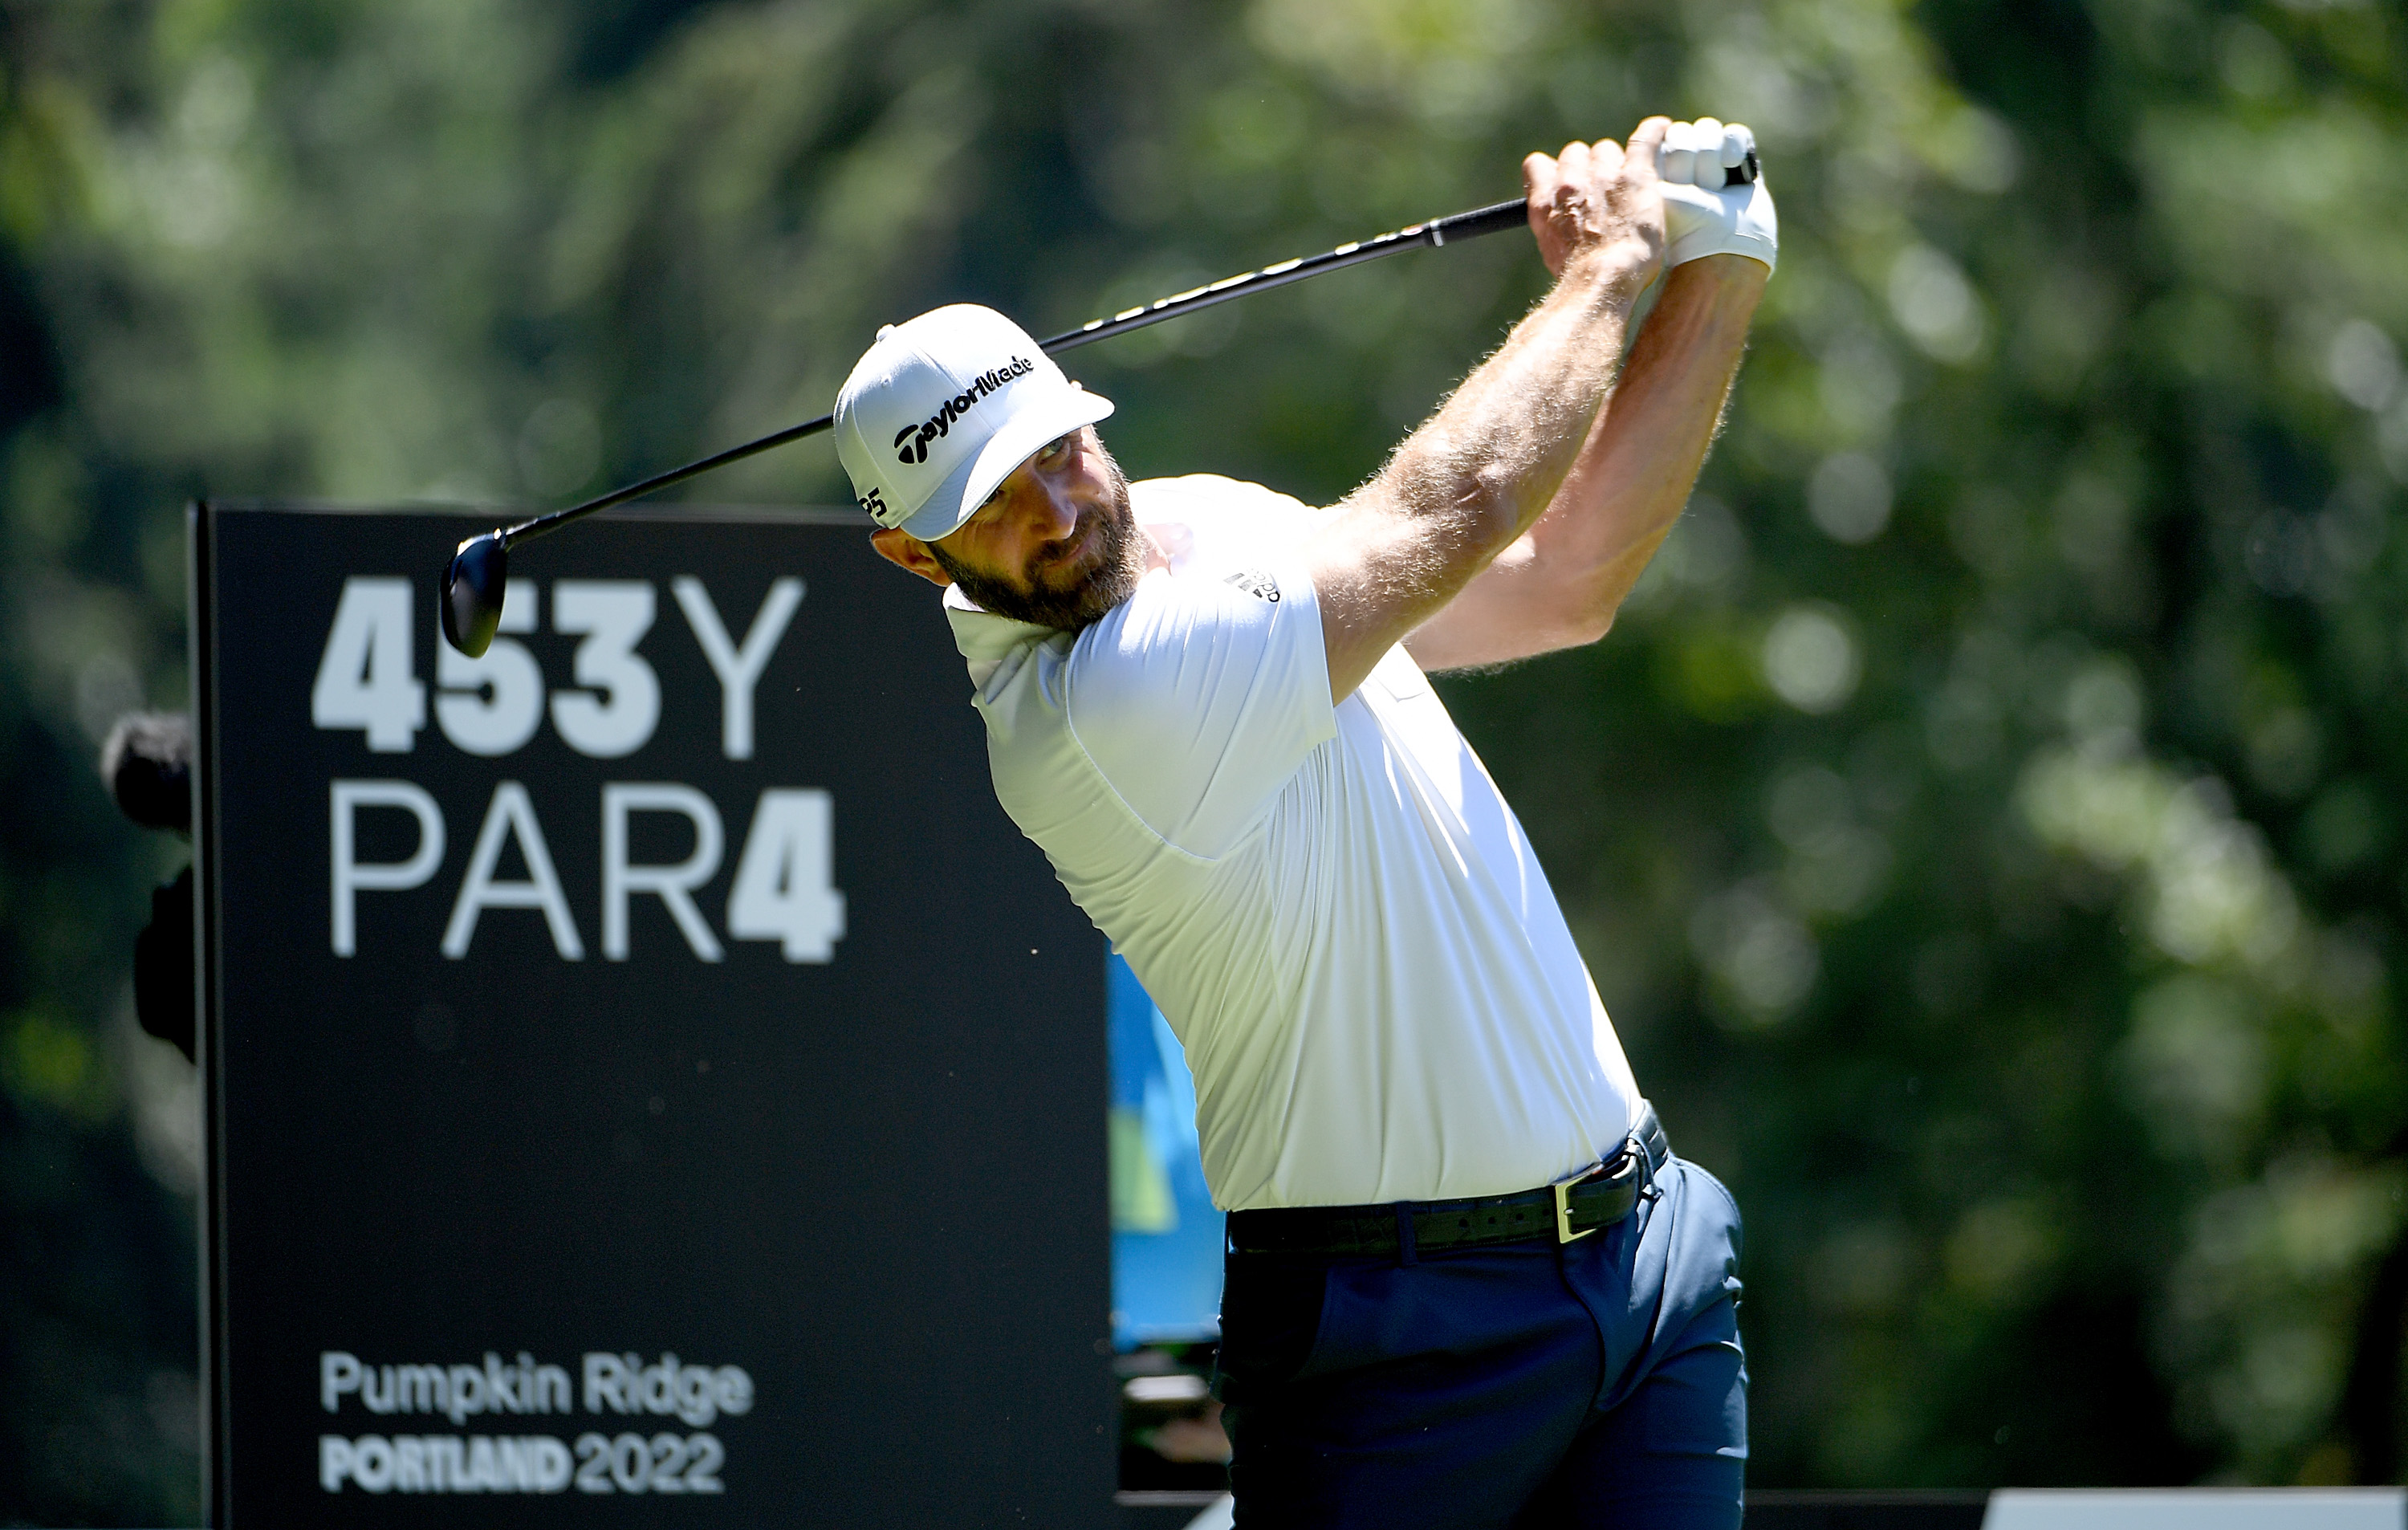 Dustin Johnson hits his tee shot on the fourth hole during round one of the LIV Golf Invitational - Portland at Pumpkin Ridge Golf Club on June 30, 2022 in North Plains, Oregon.